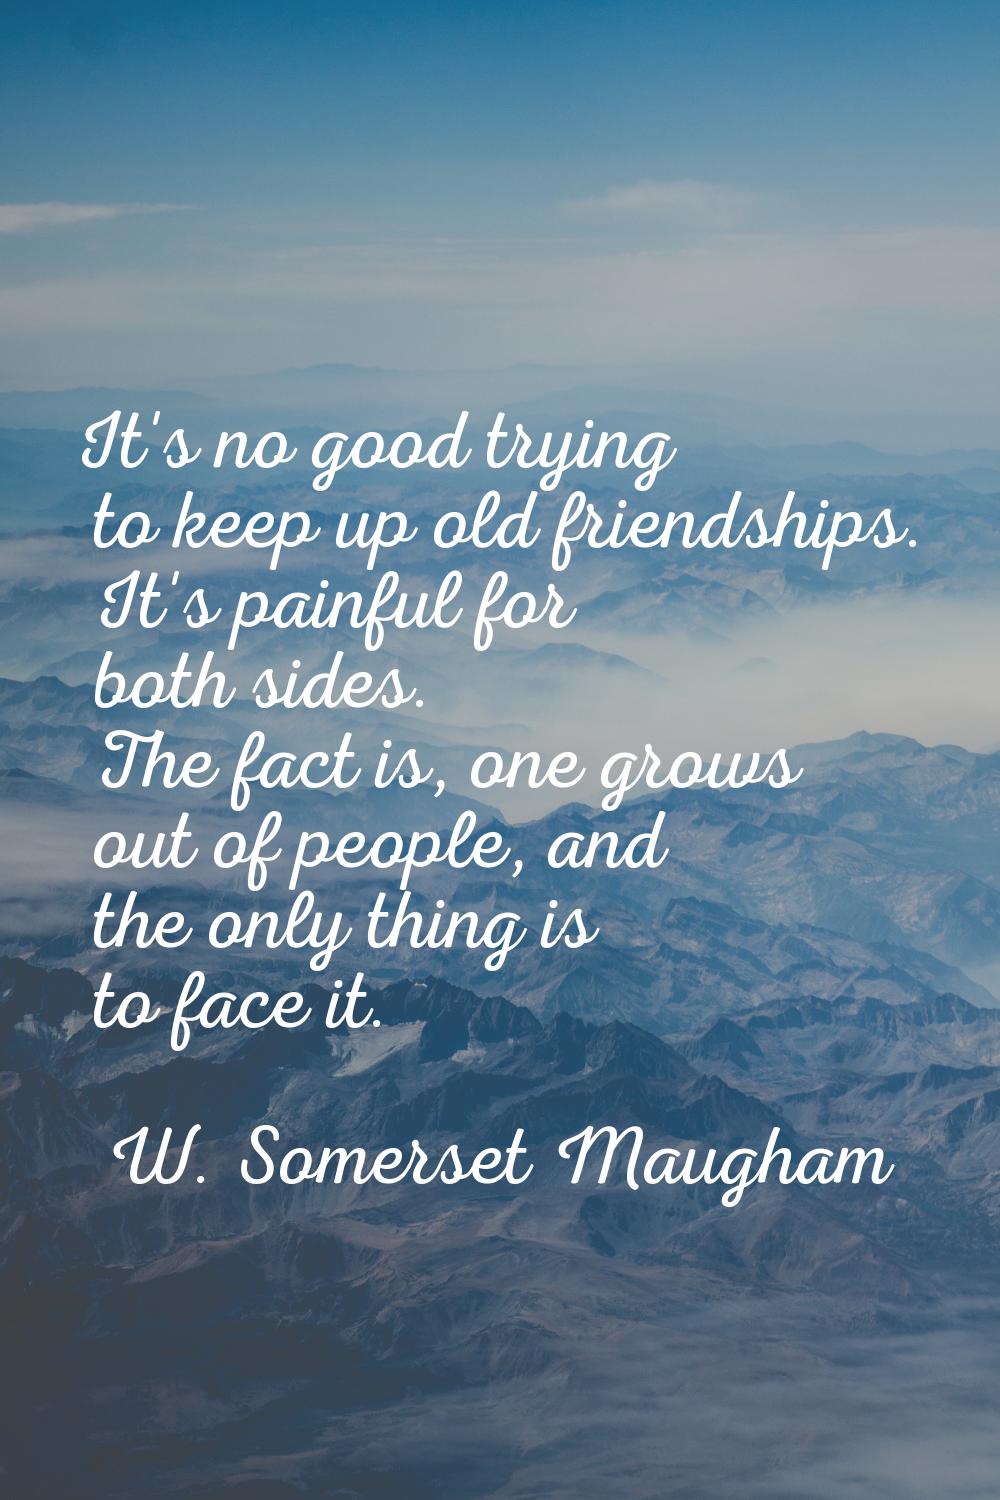 It's no good trying to keep up old friendships. It's painful for both sides. The fact is, one grows